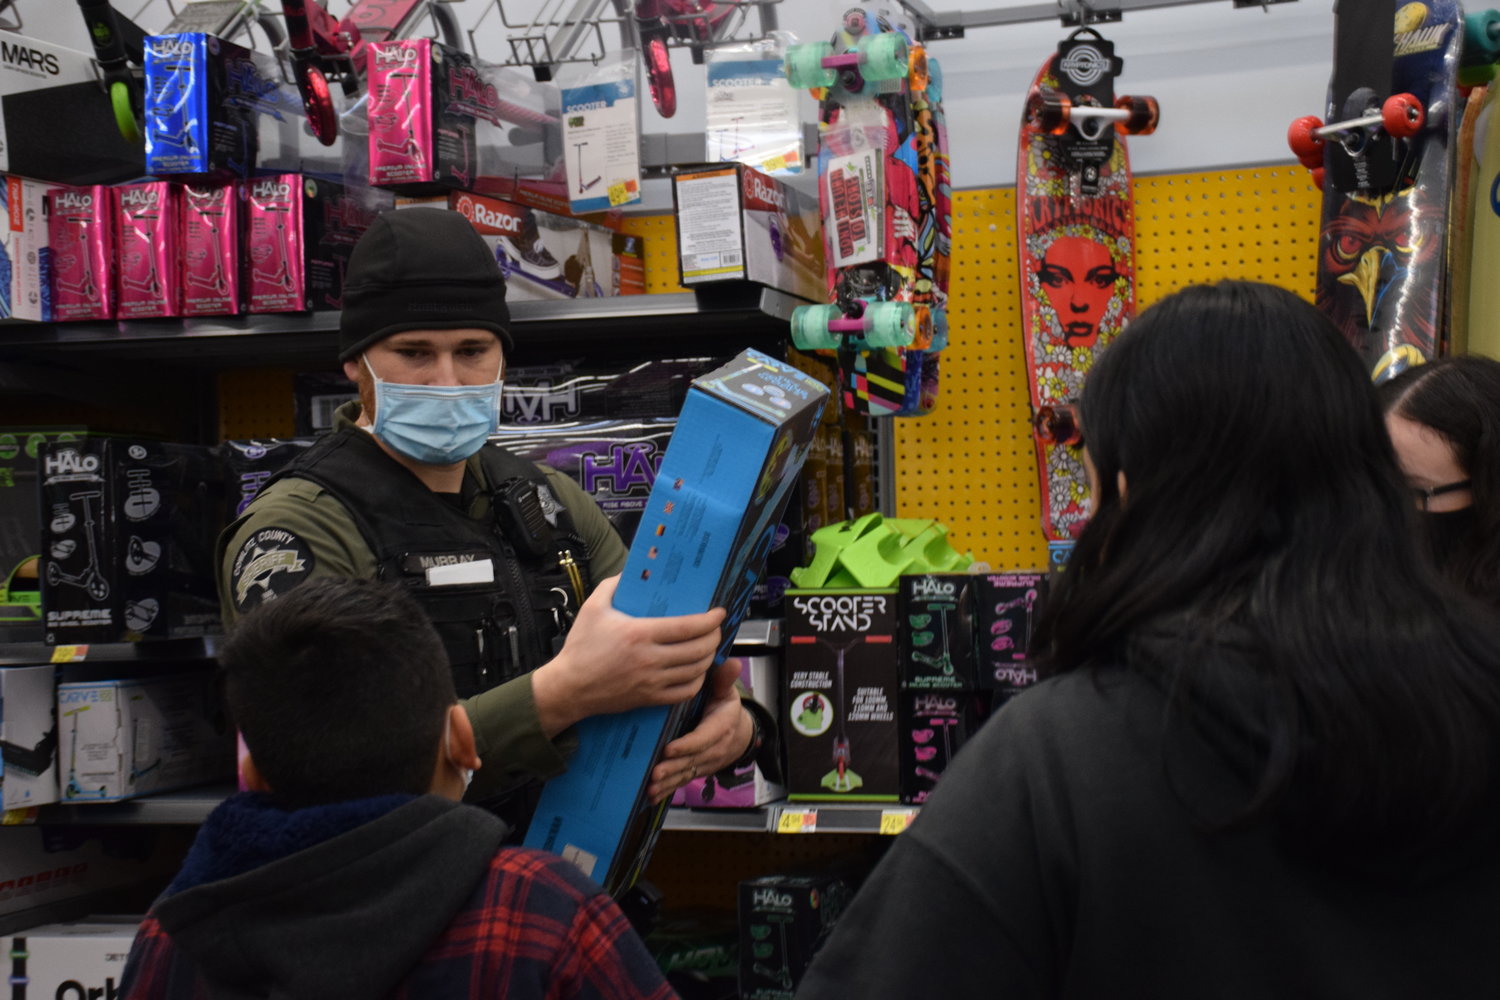 Cowlitz County Sheriff’s deputy Craig Murray consults with Josue Sanchez-Espinal on a scooter during Woodland’s annual Shop With a Cop event on Dec. 11.